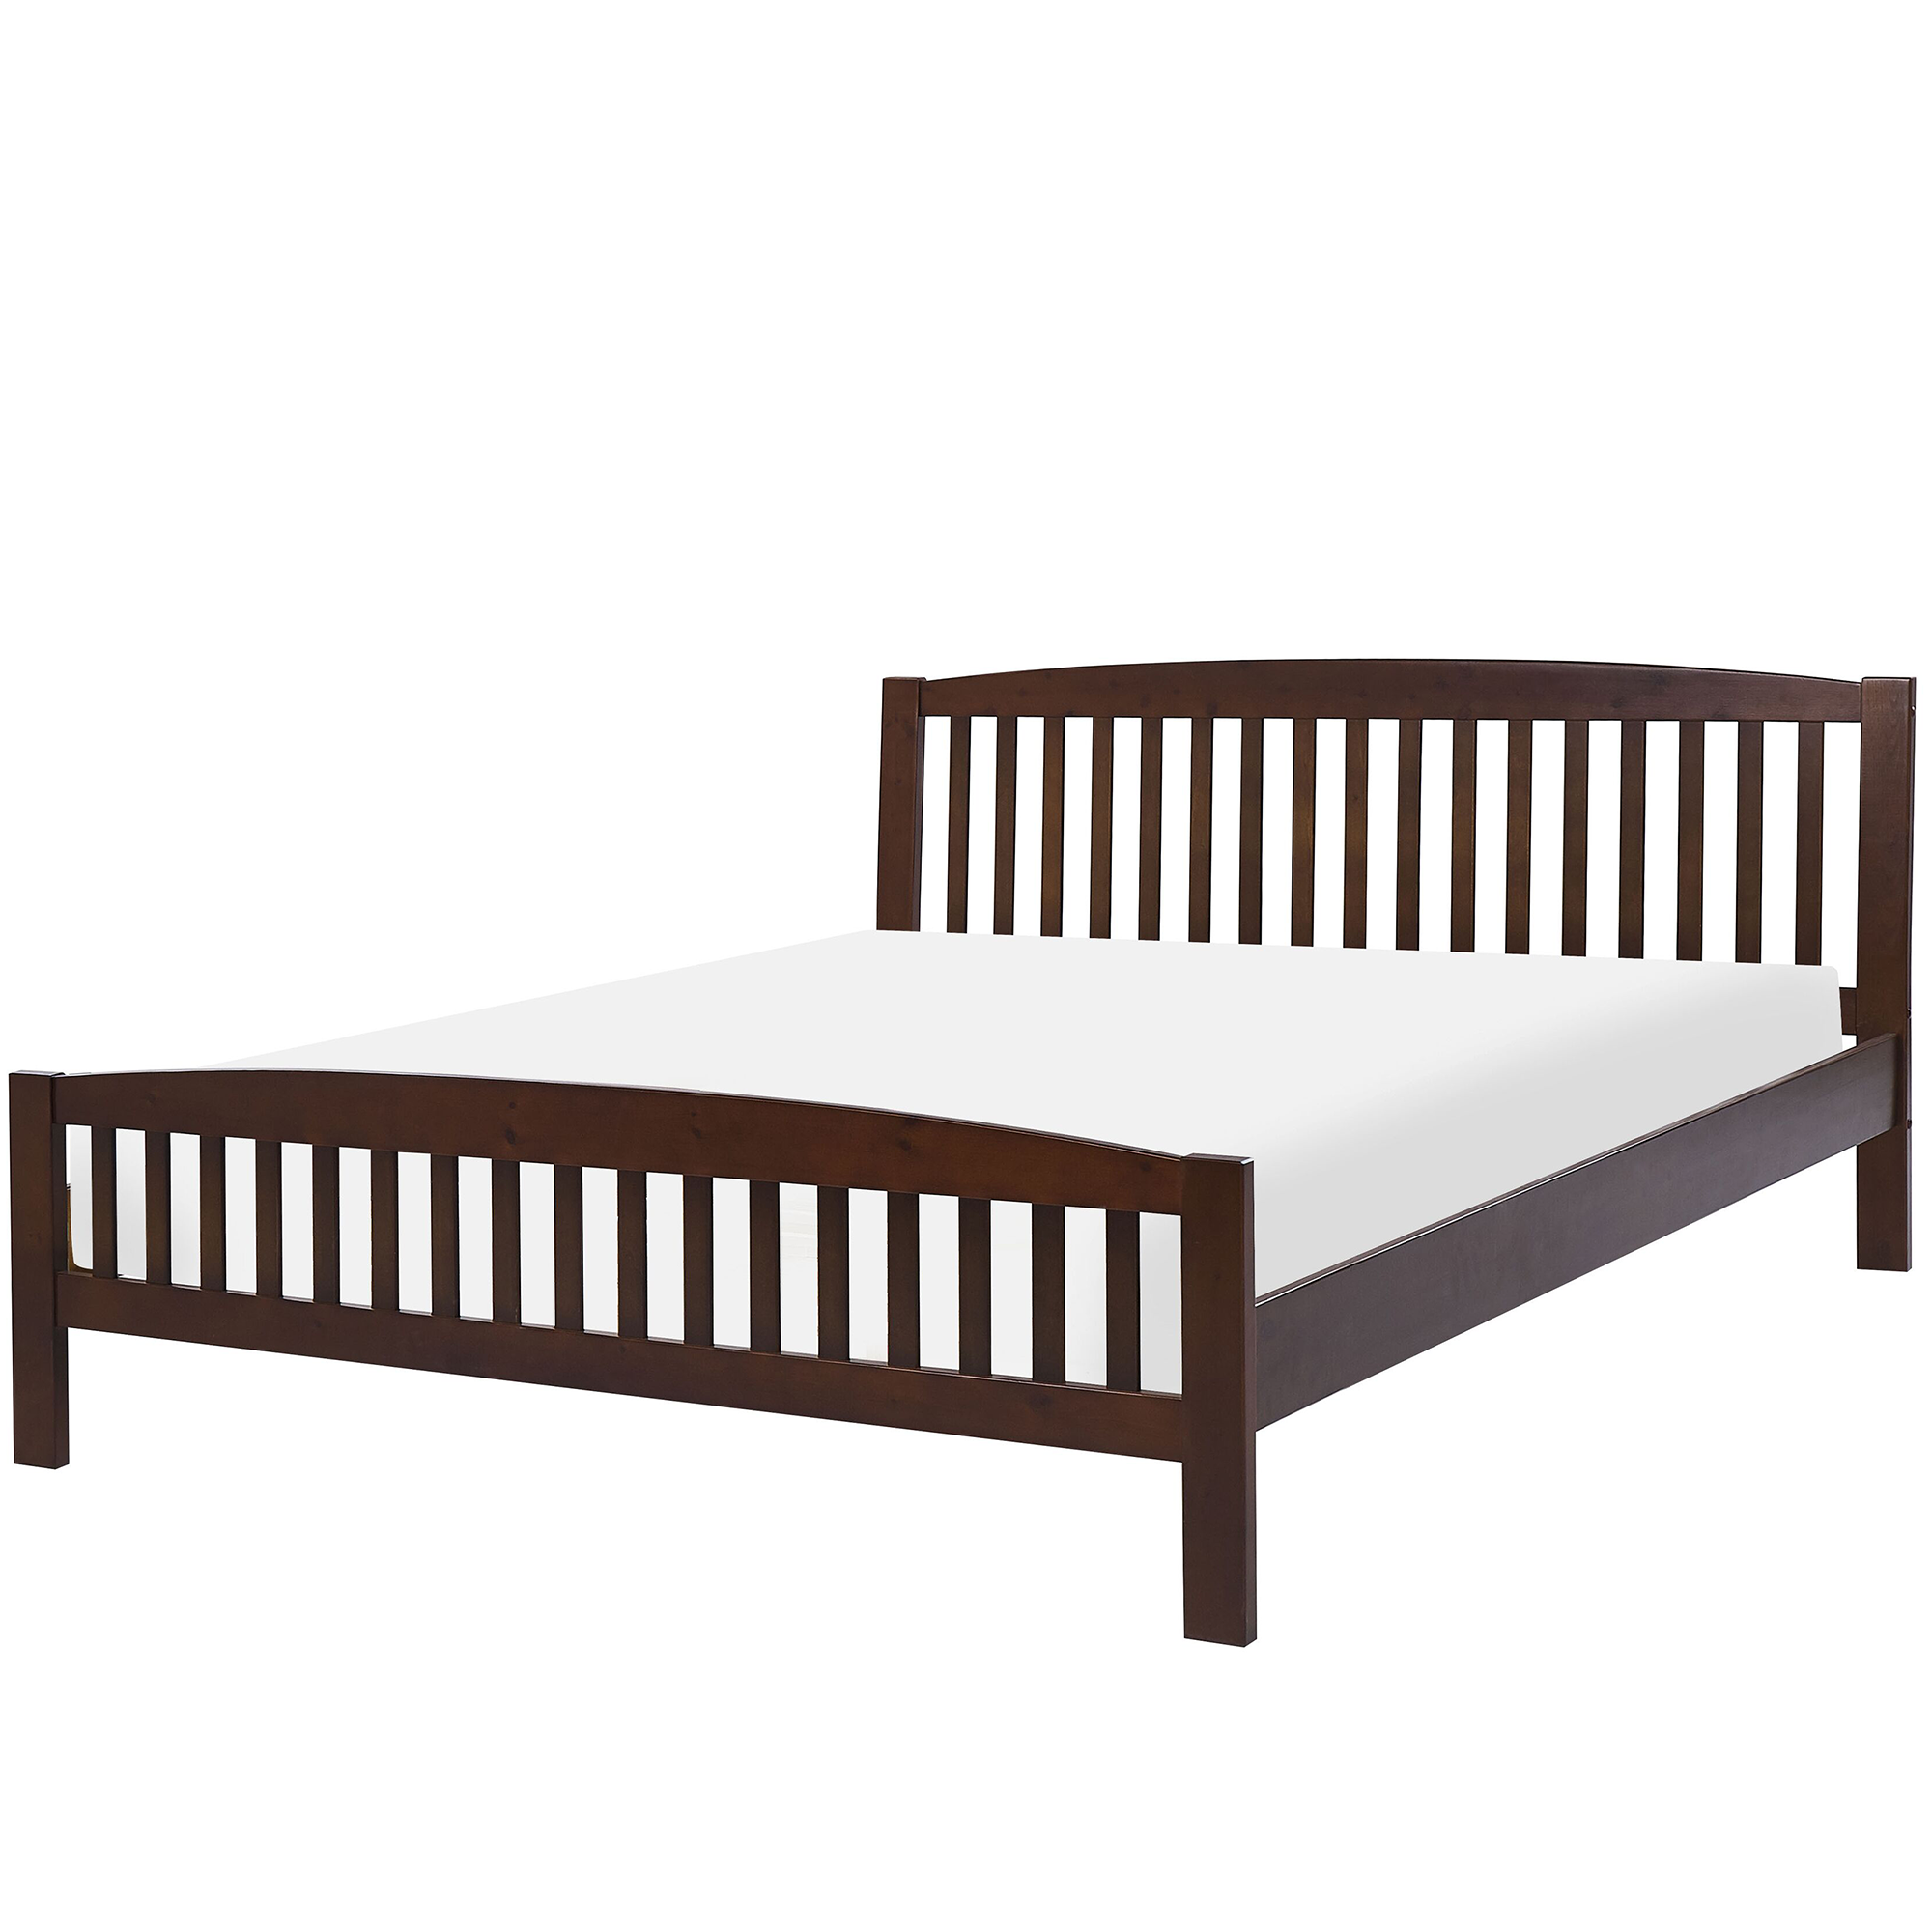 BELIANI Bed hout donkerbruin 160 x 200 cm CASTRES